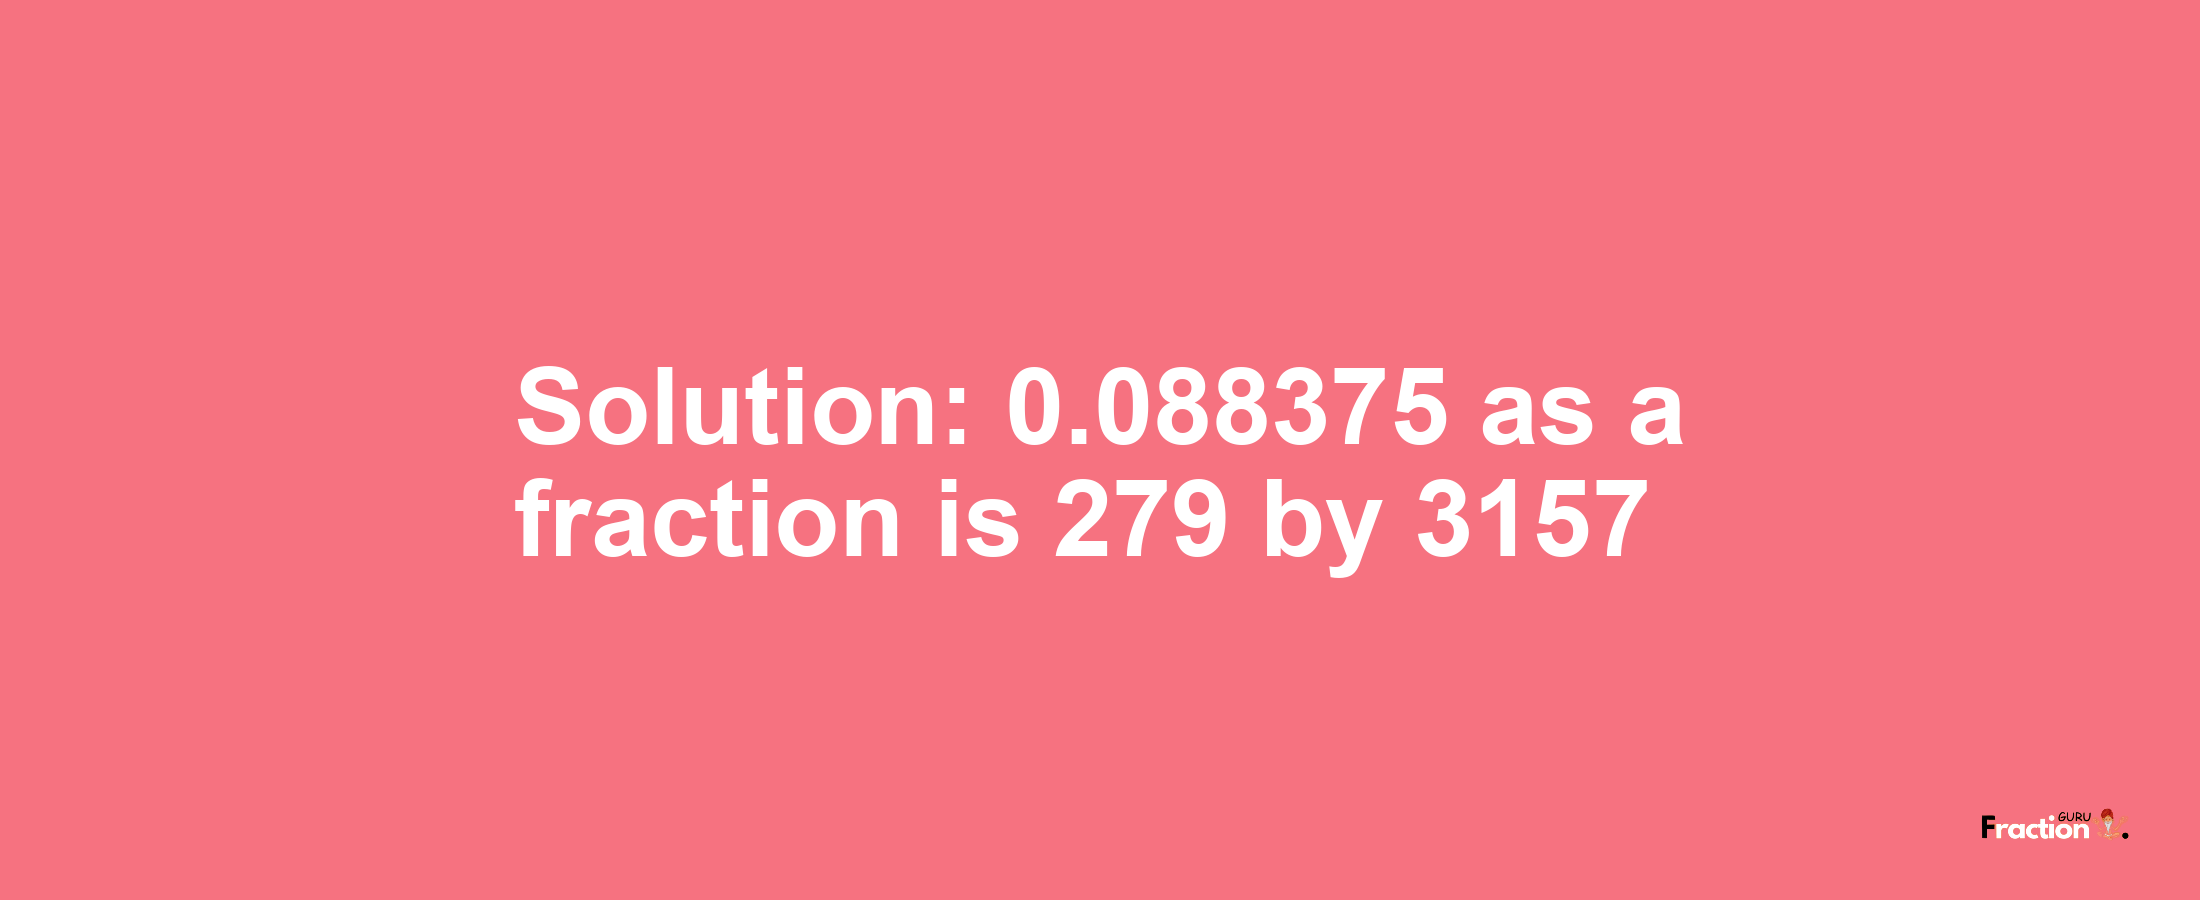 Solution:0.088375 as a fraction is 279/3157